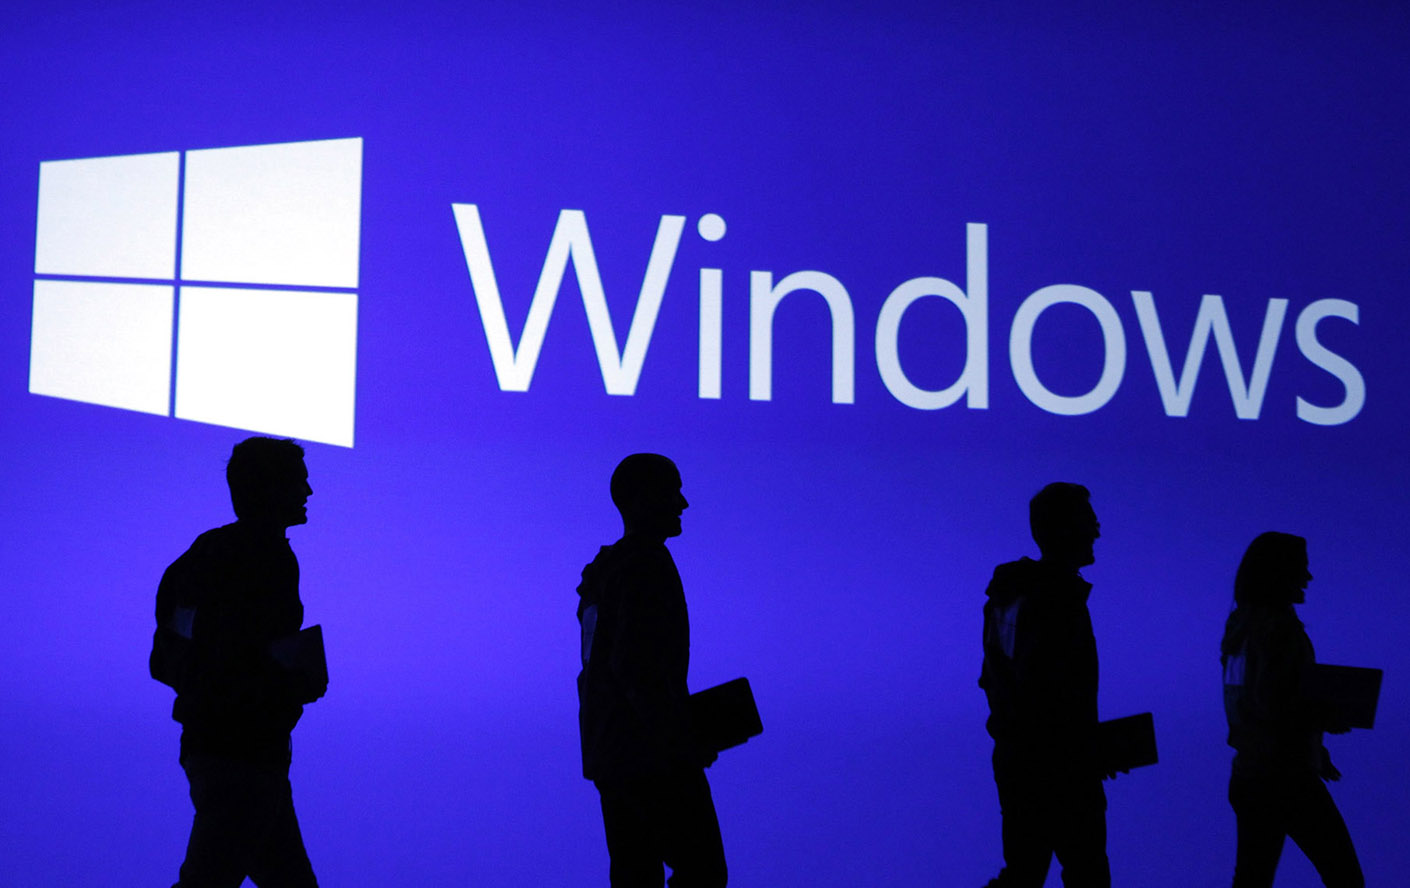 File photo of guests silhouetted at  the launch event of Microsoft Windows 8 operating system in New York